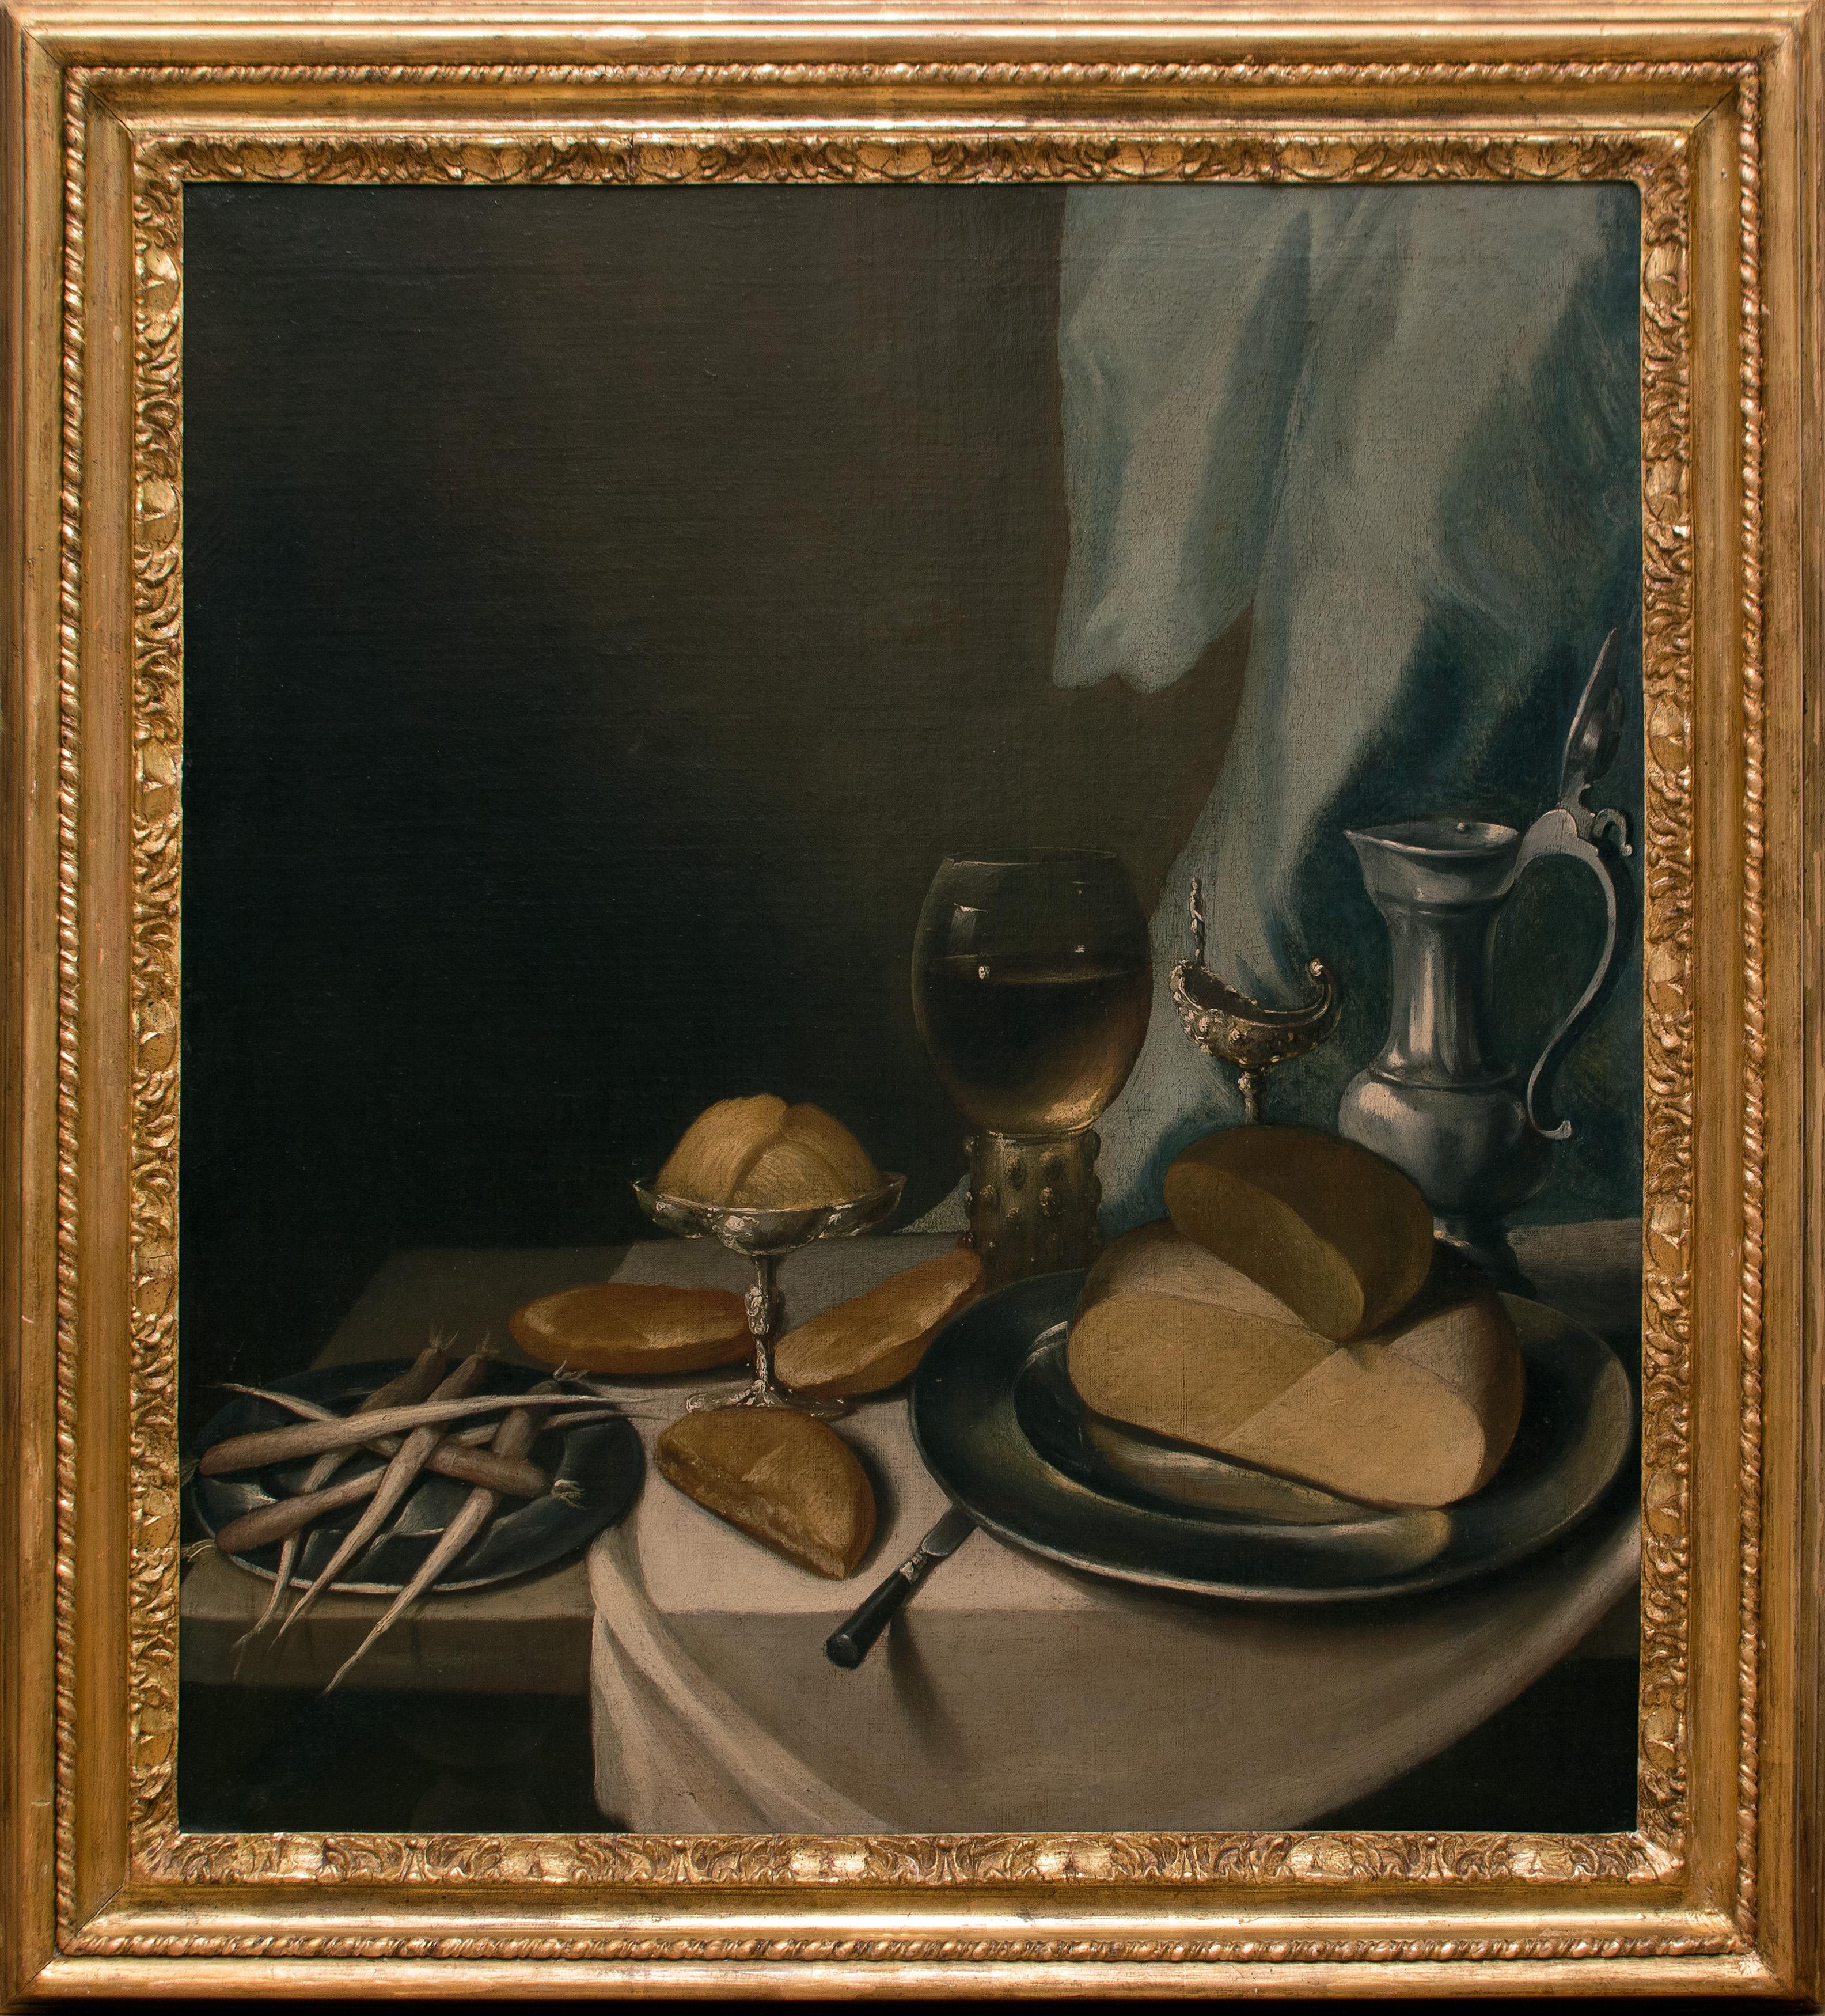 Unknown Figurative Painting - Table with food and Pottery- Oil on Canvas by Flemish Artist 17th Century